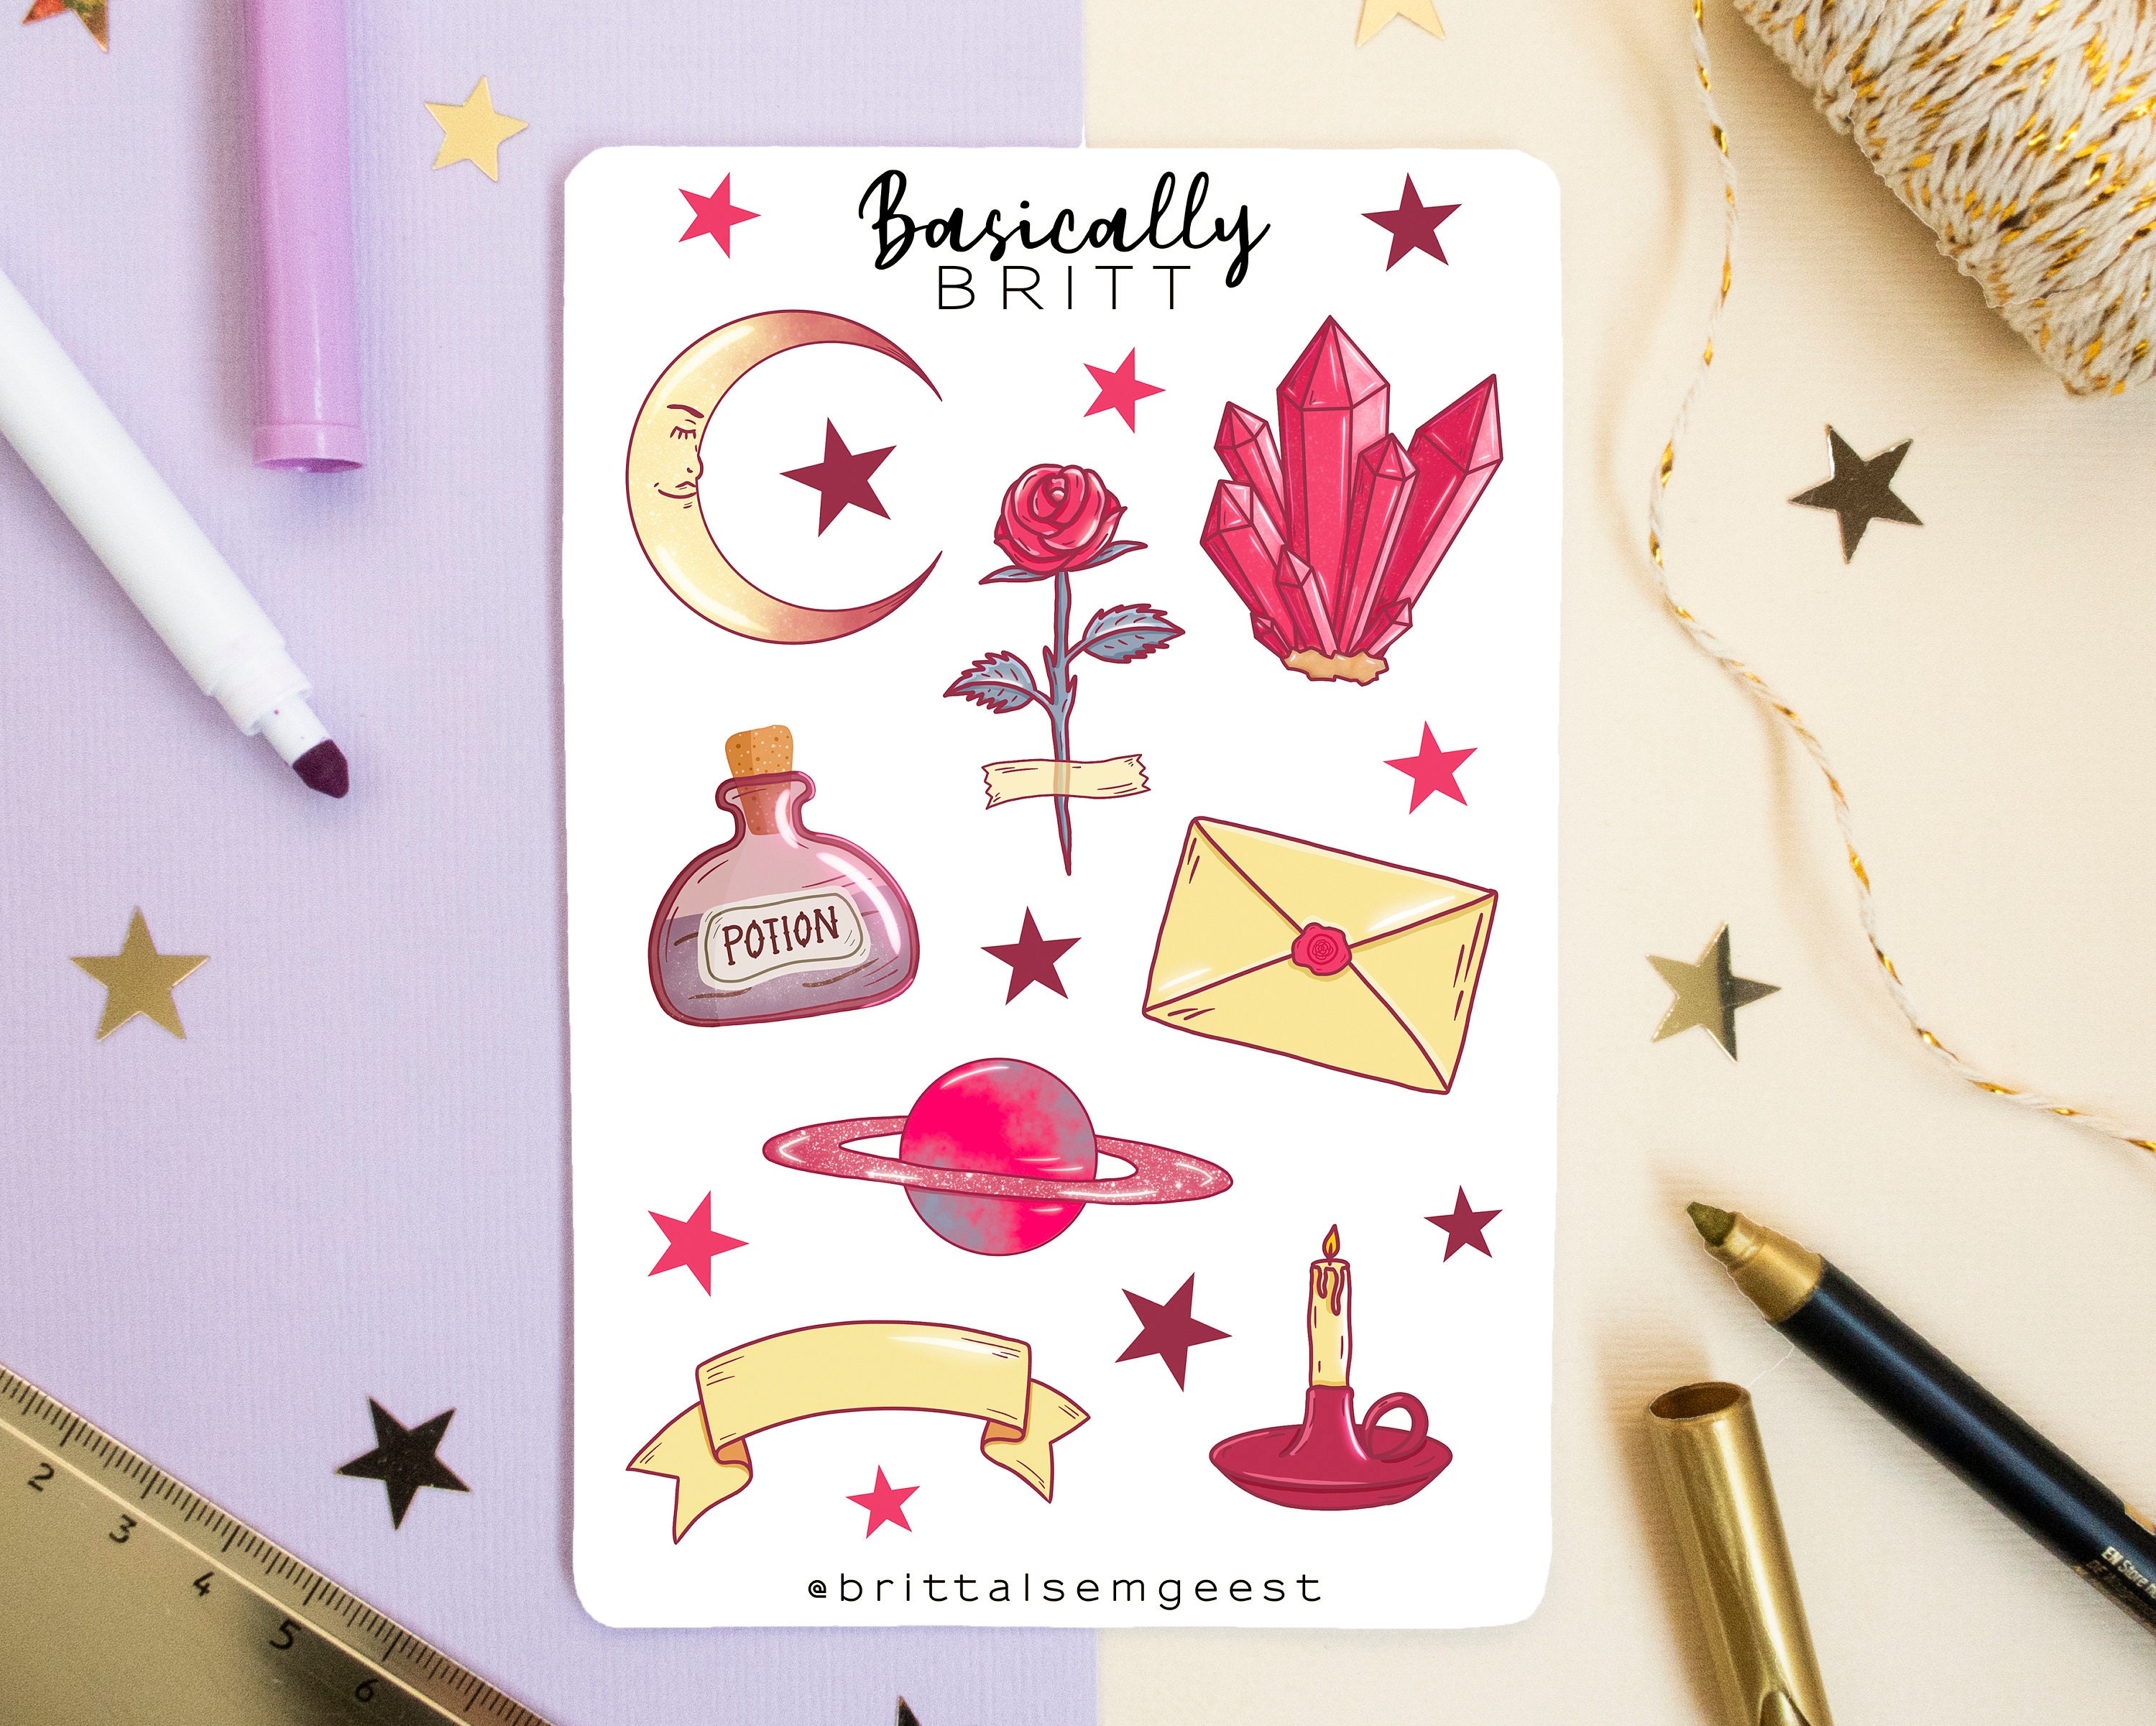 Mystica Printable Journal Stickers, Witchy Sticker Set for